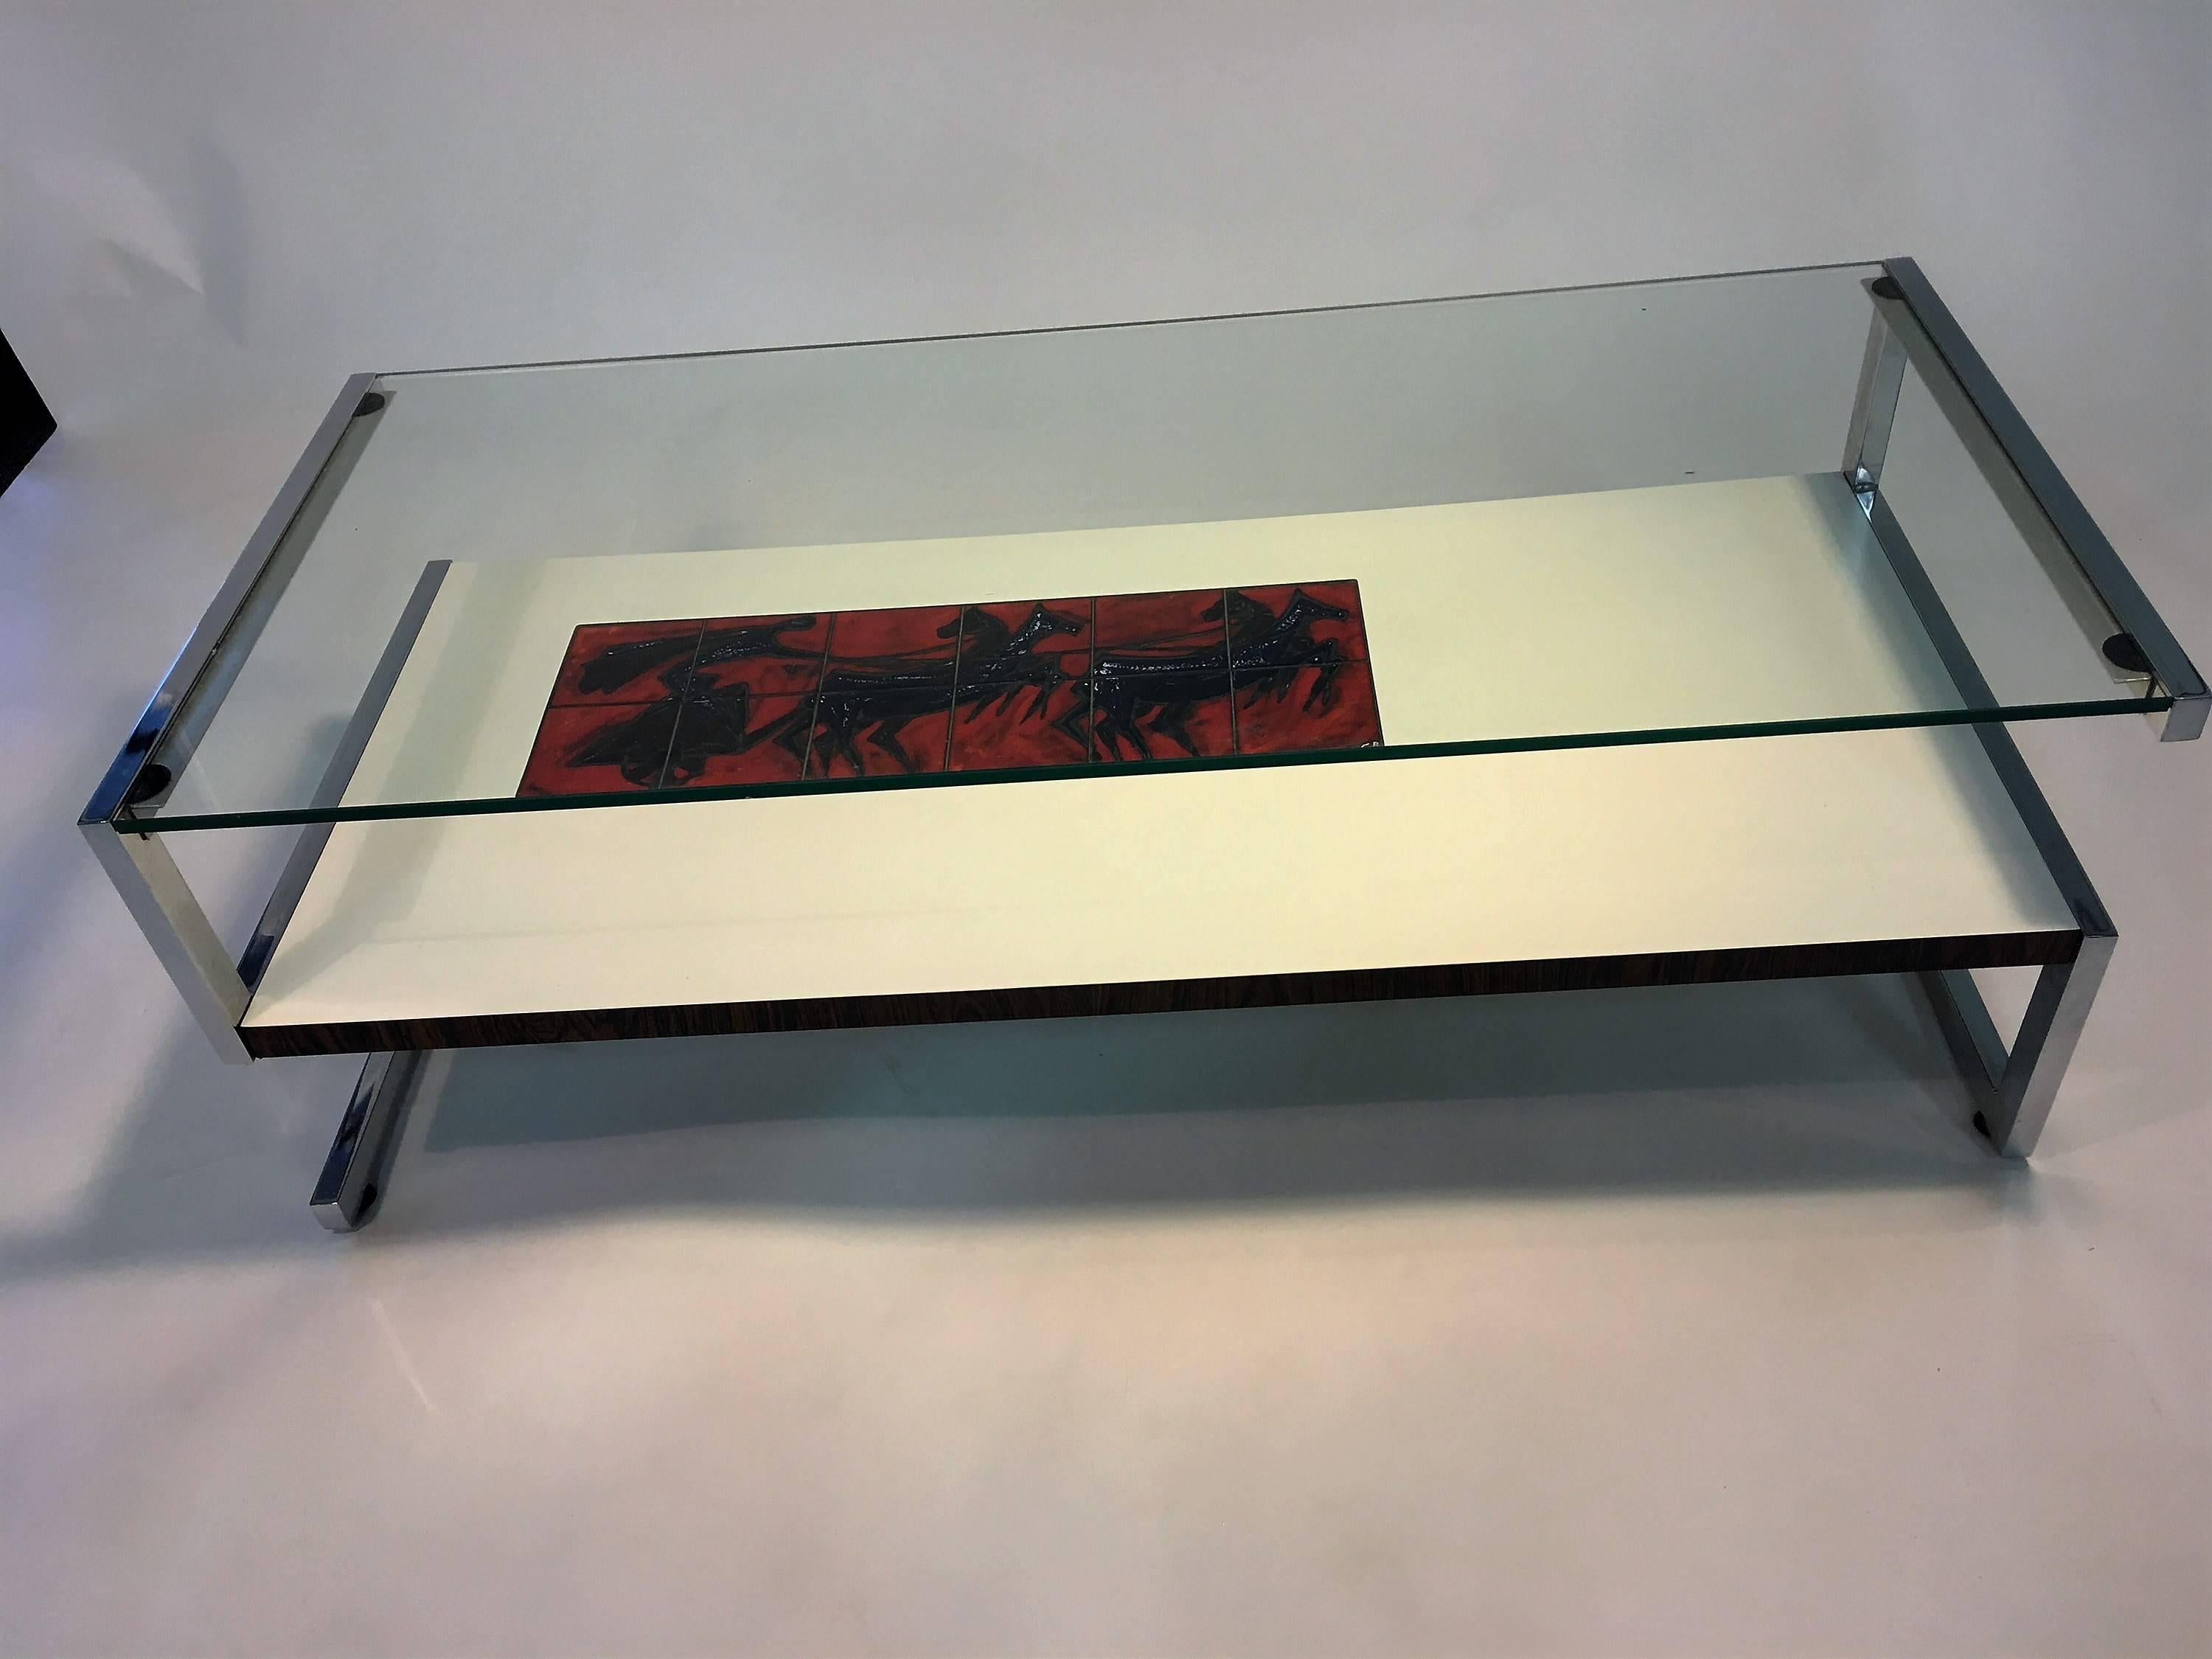 Late 20th Century Amazing Italian Modernist Tile and Laminate Chrome Frame Coffee Table For Sale